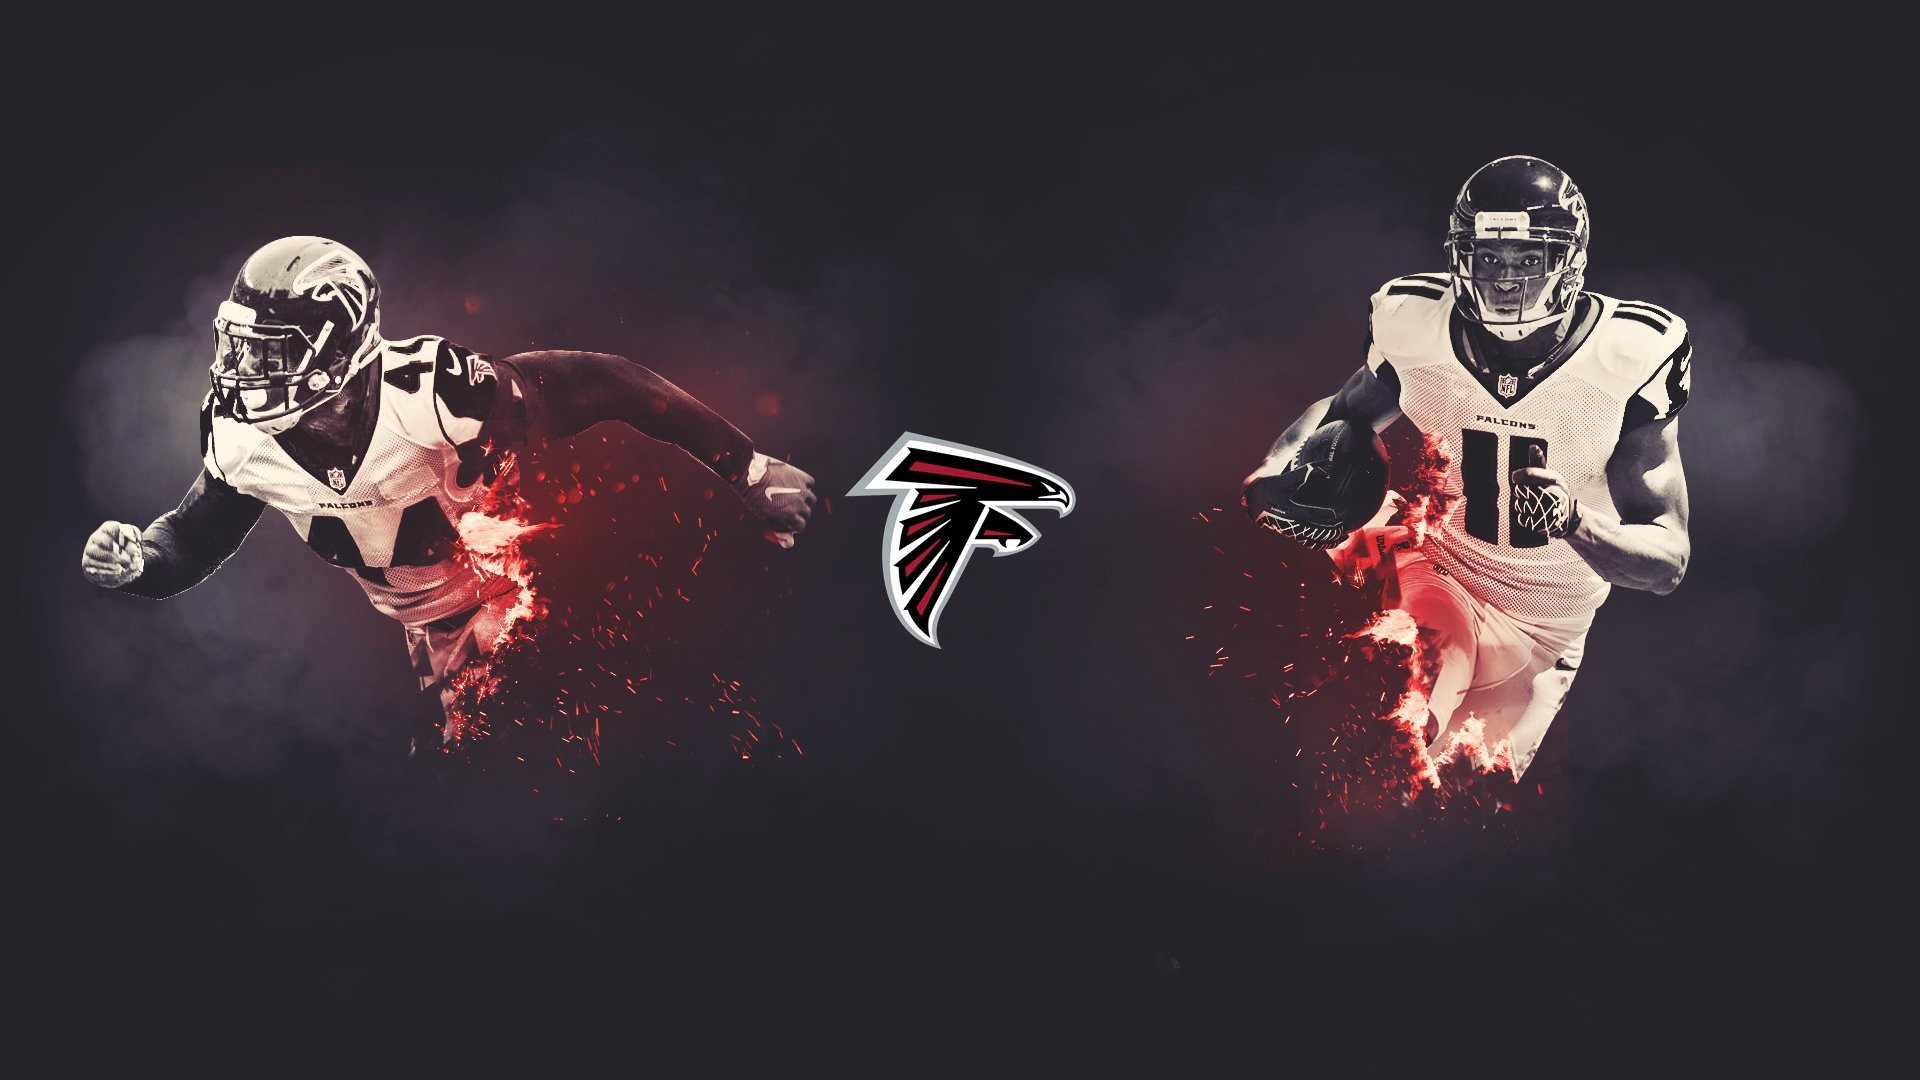 Wallpapers Falcons with high-resolution 1920x1080 pixel. You can use this wallpaper for your Mac or Windows Desktop Background, iPhone, Android or Tablet and another Smartphone device